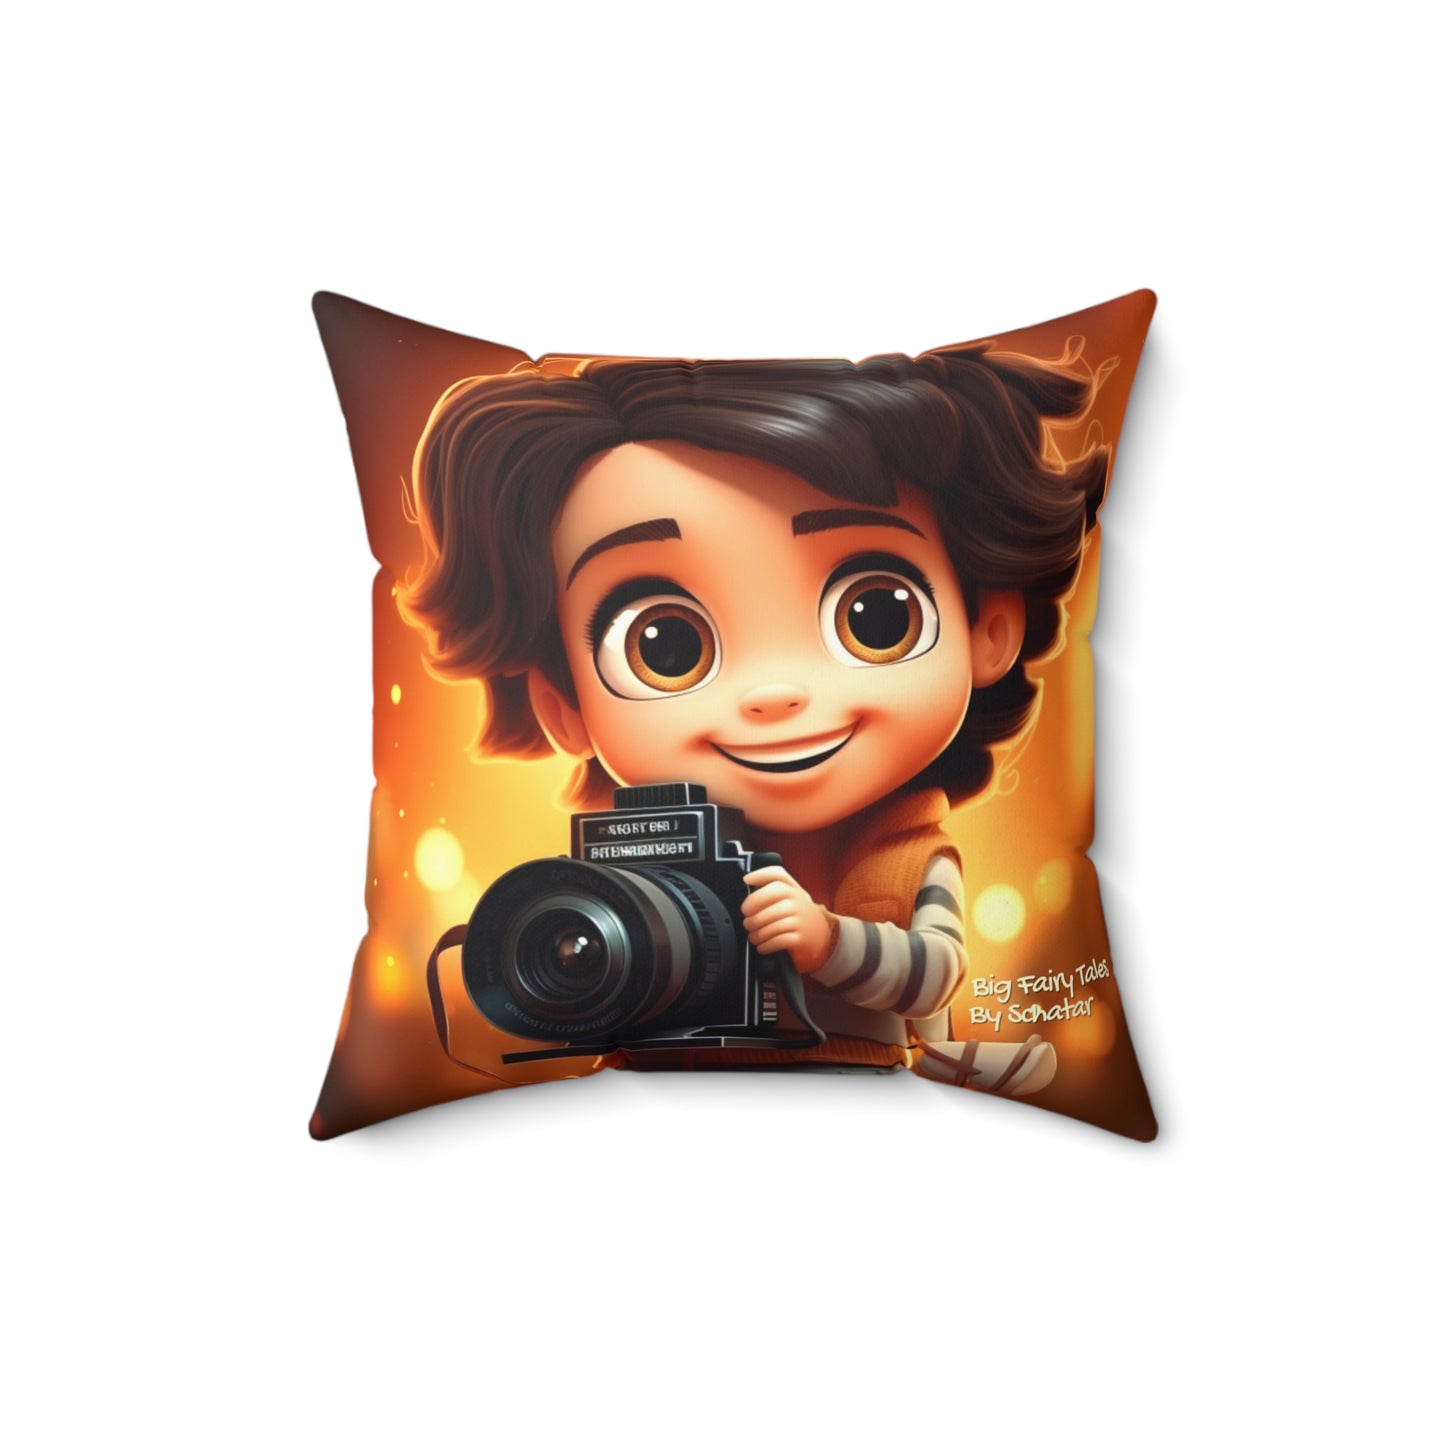 Cinematographer - Big Little Professionals Plush Pillow 4 From Big Fairy Tales By Schatar